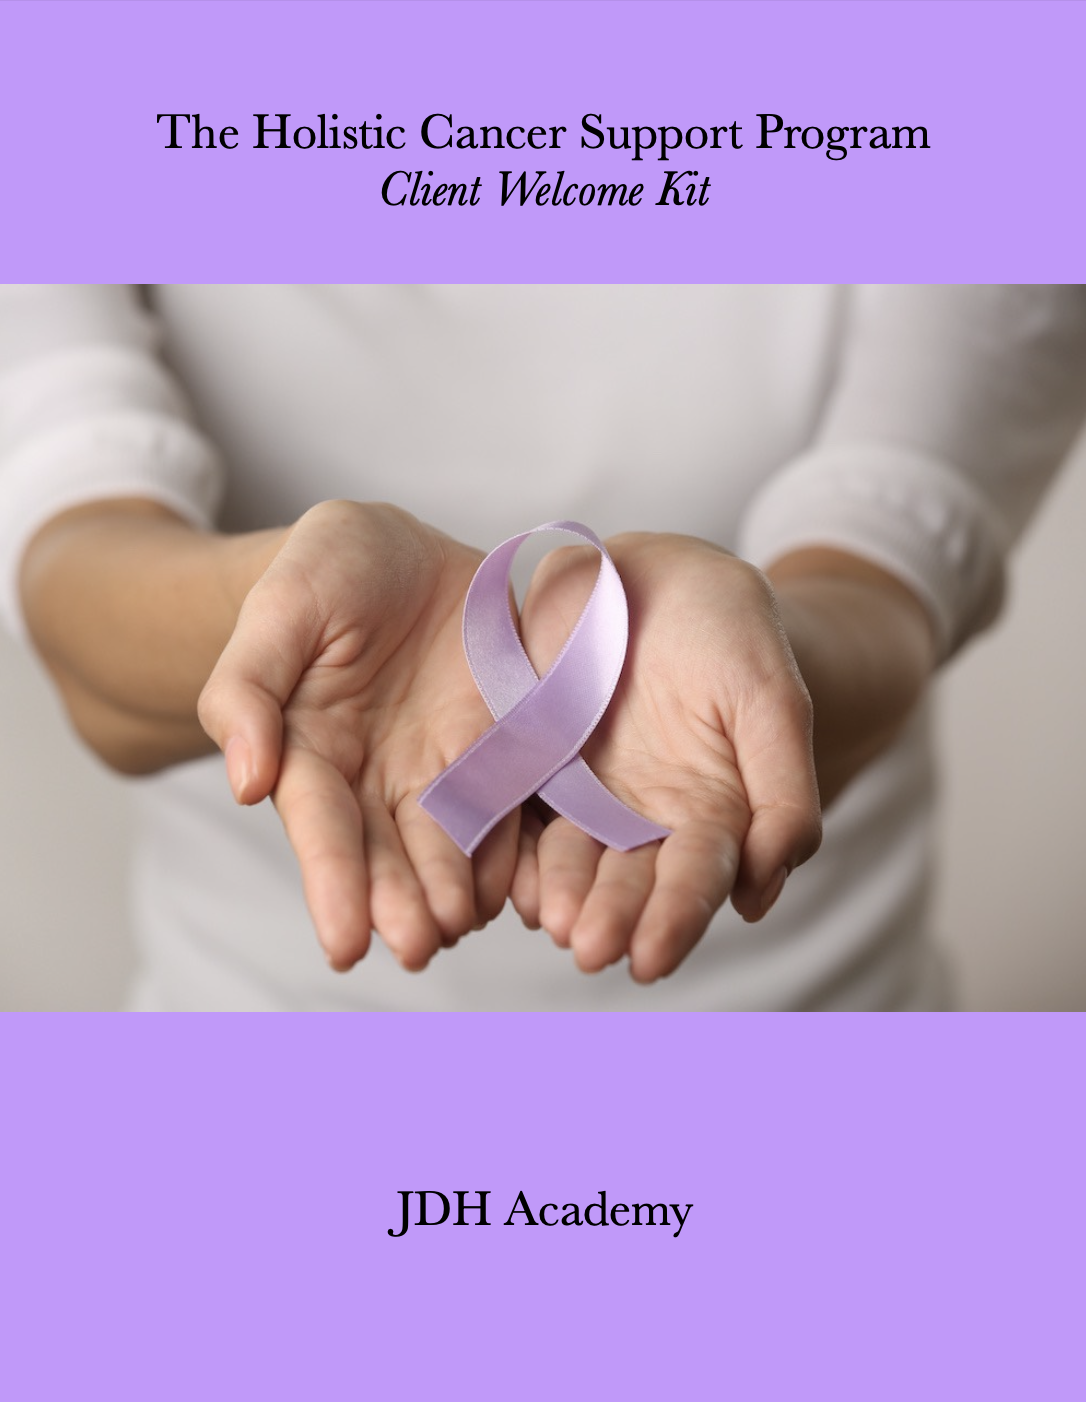 The Holistic Cancer Support Program Welcome Kit